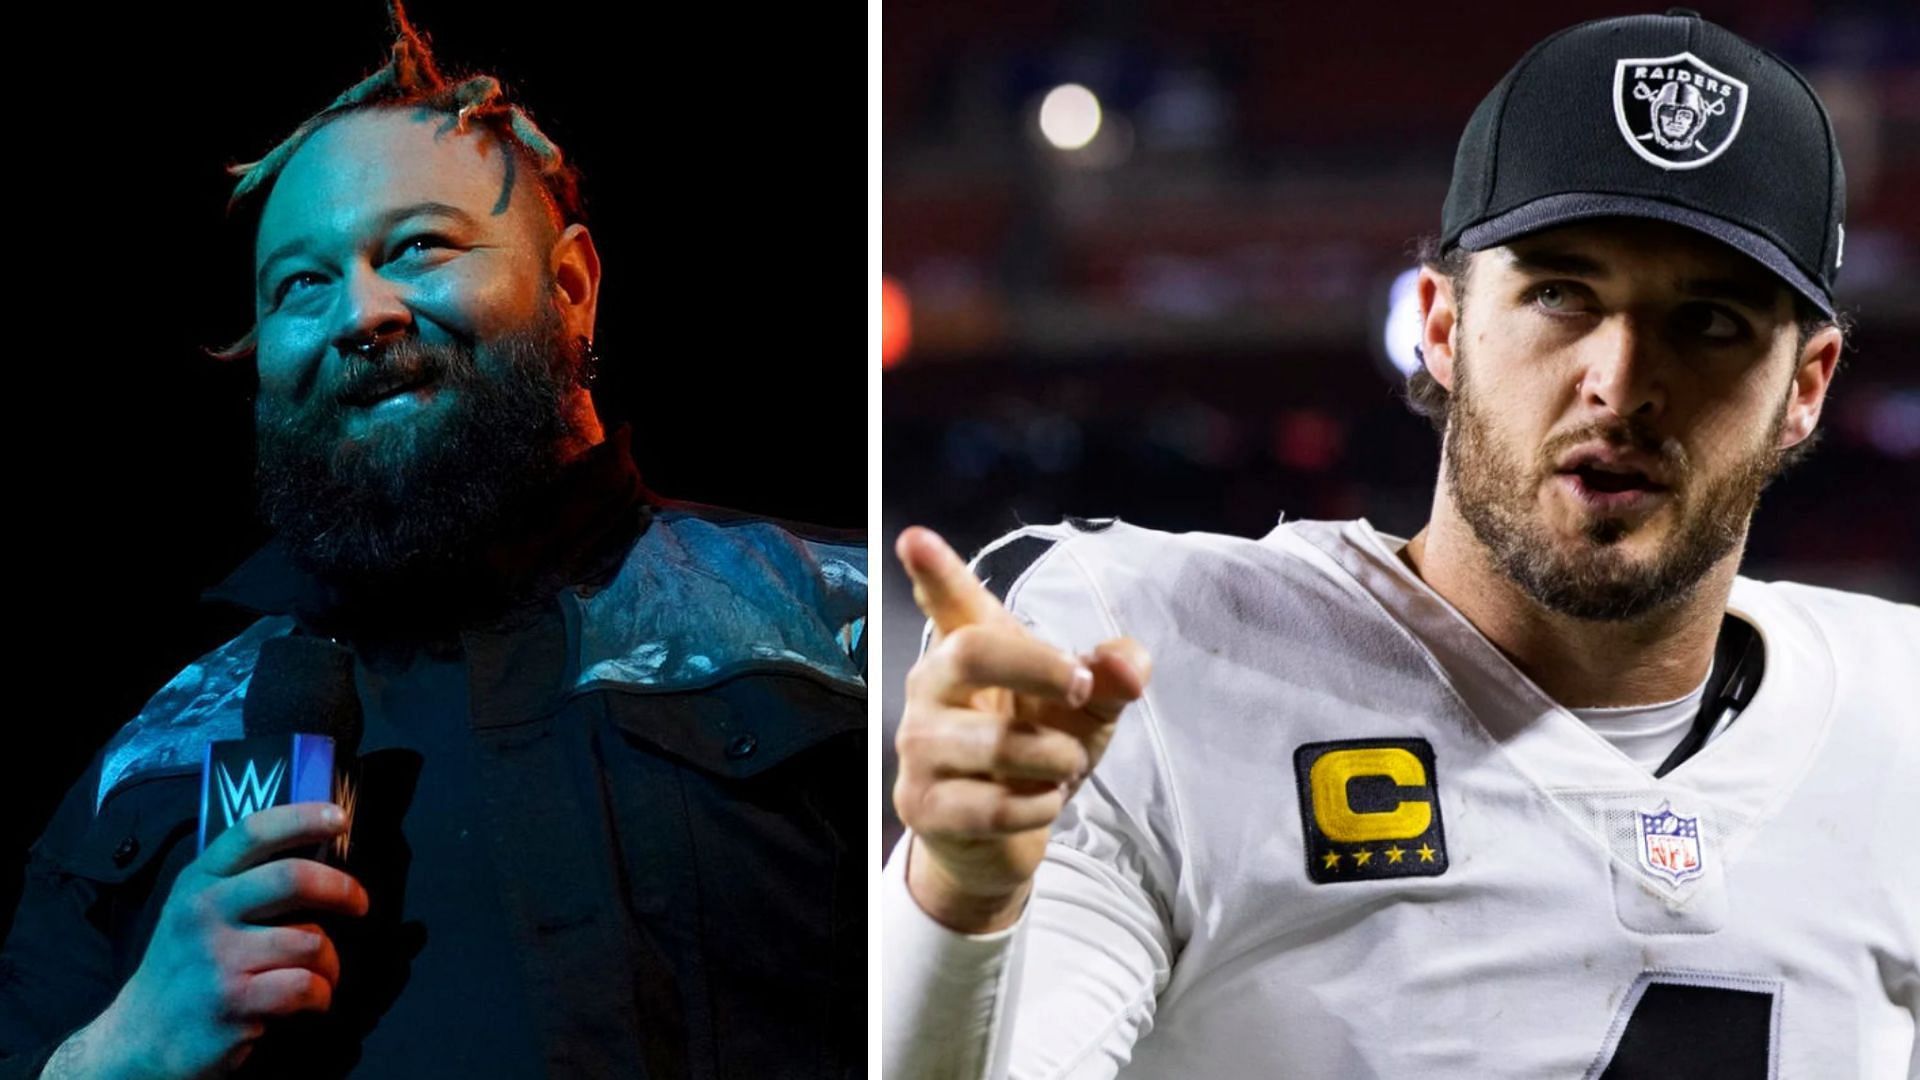 Bray Wyatt is currently involved in a rivalry with LA Knight on WWE SmackDown